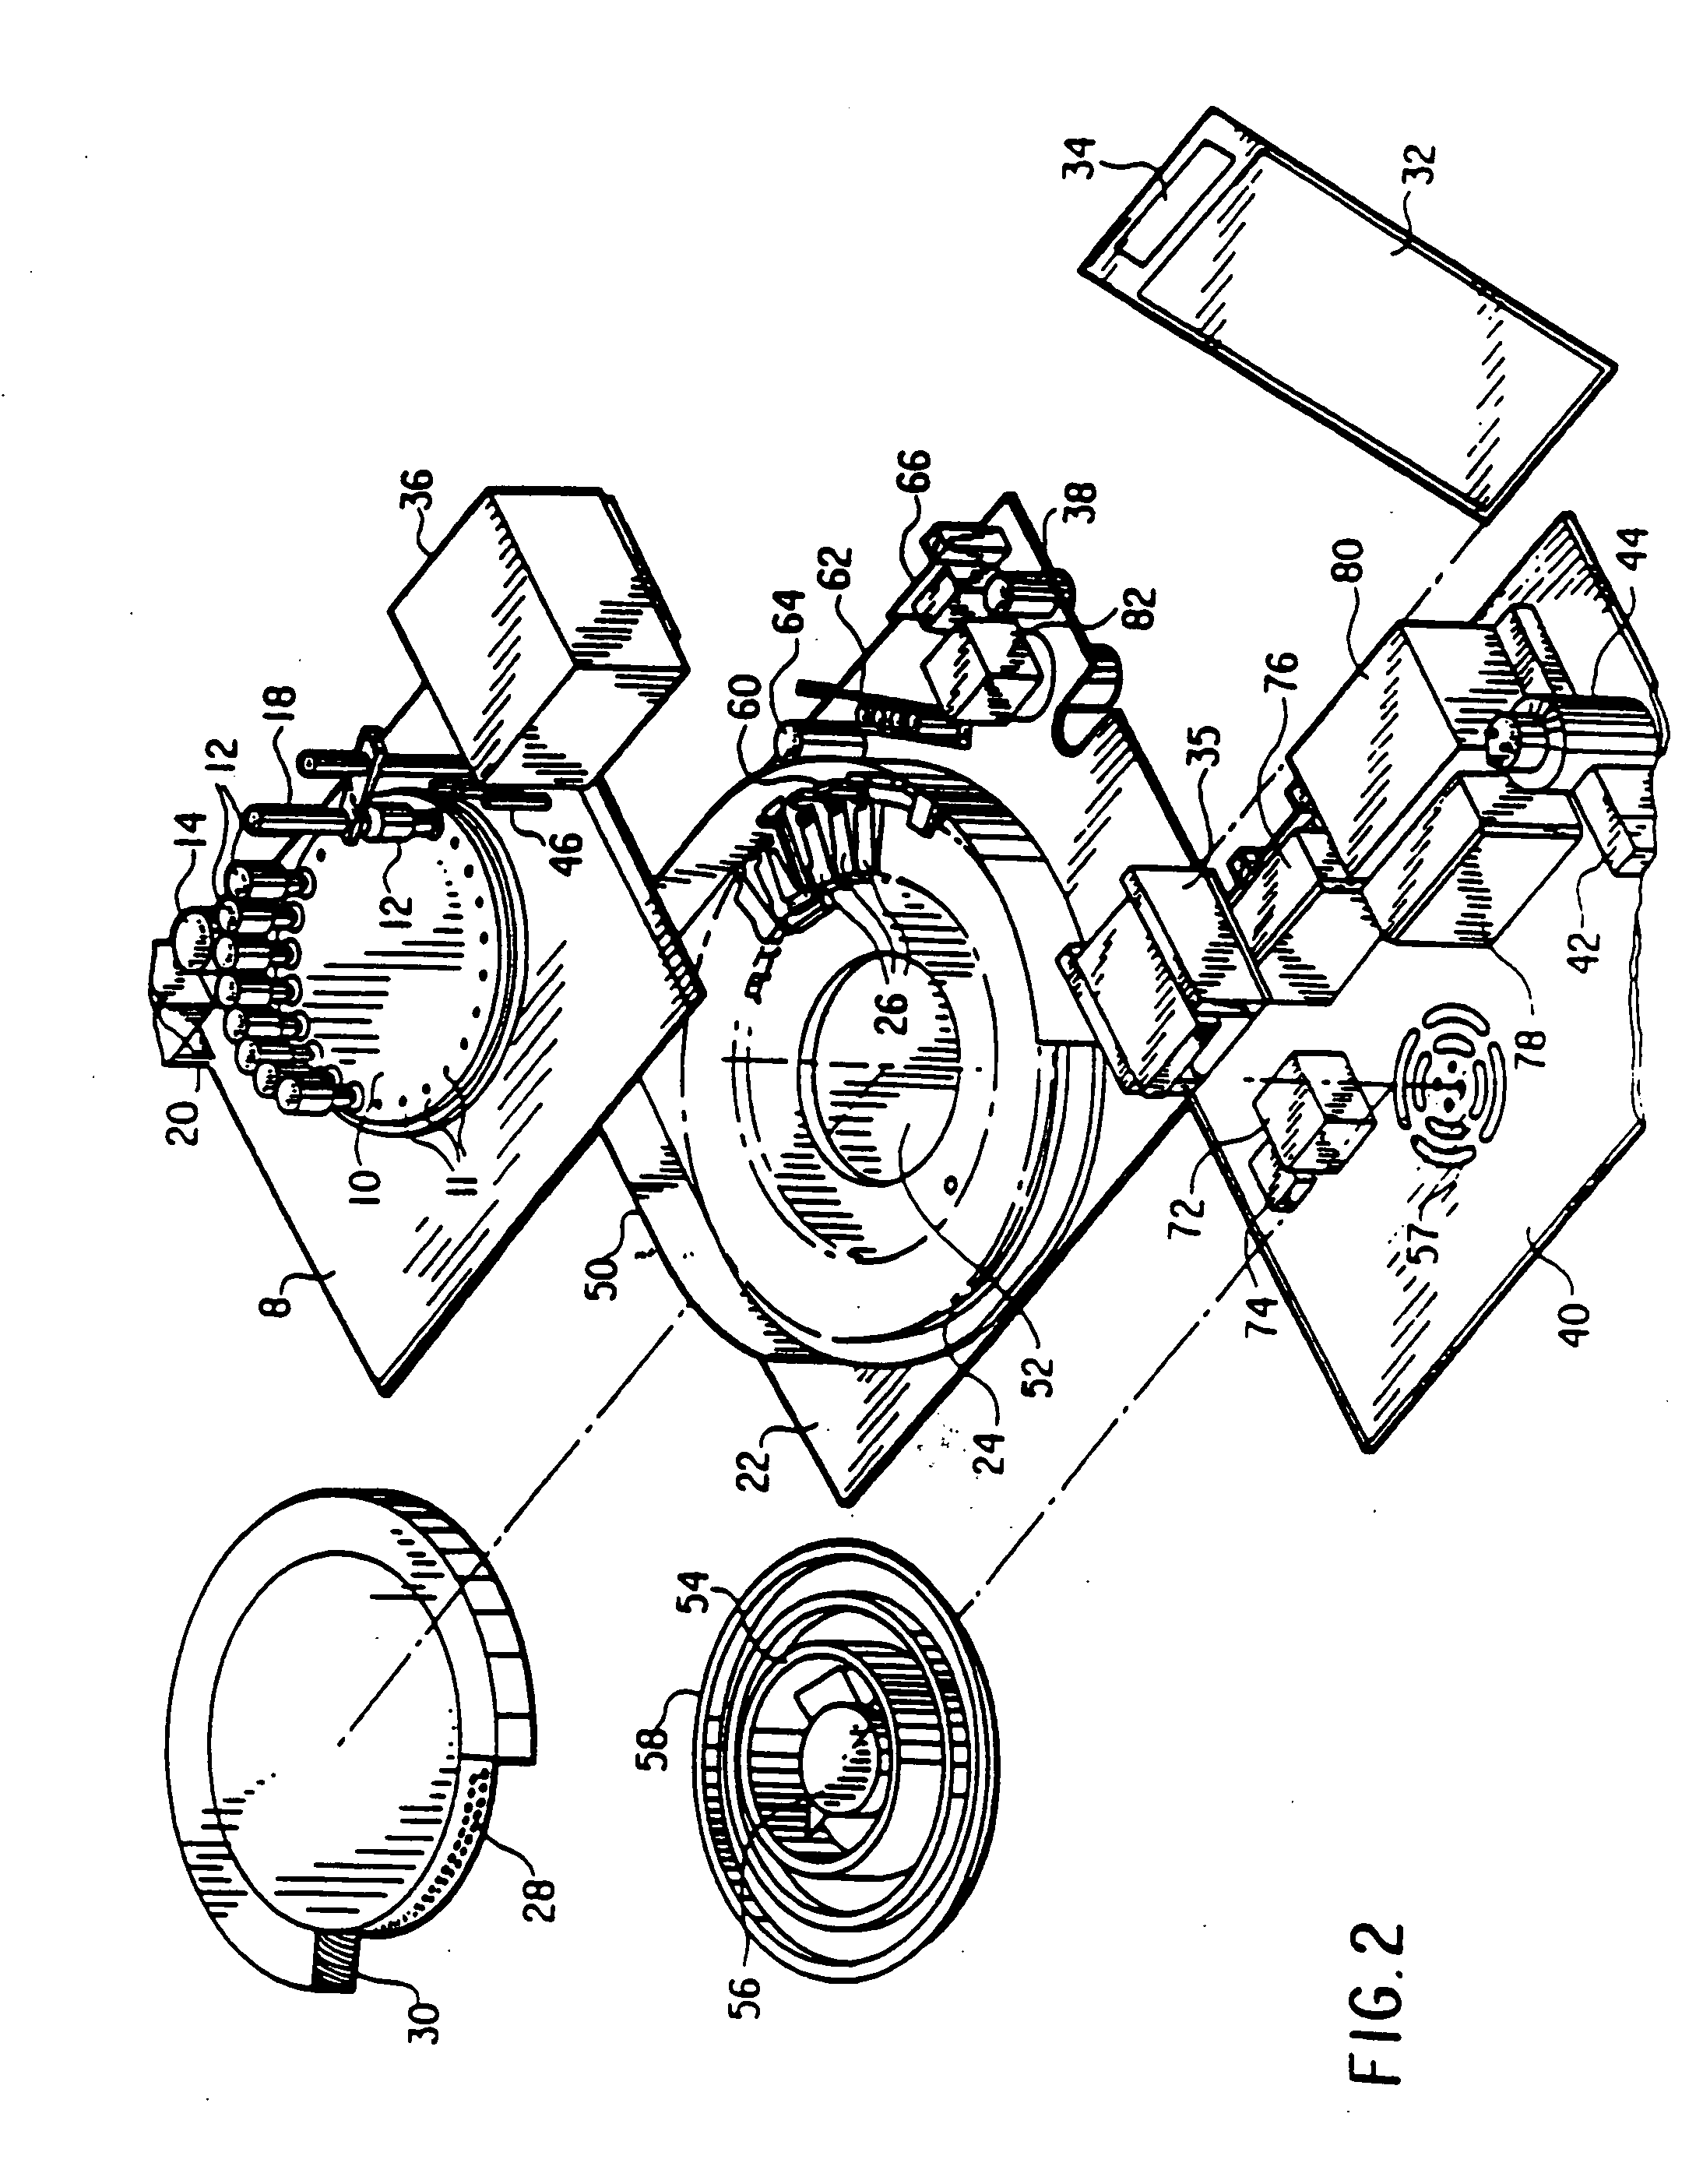 Automated biological reaction apparatus